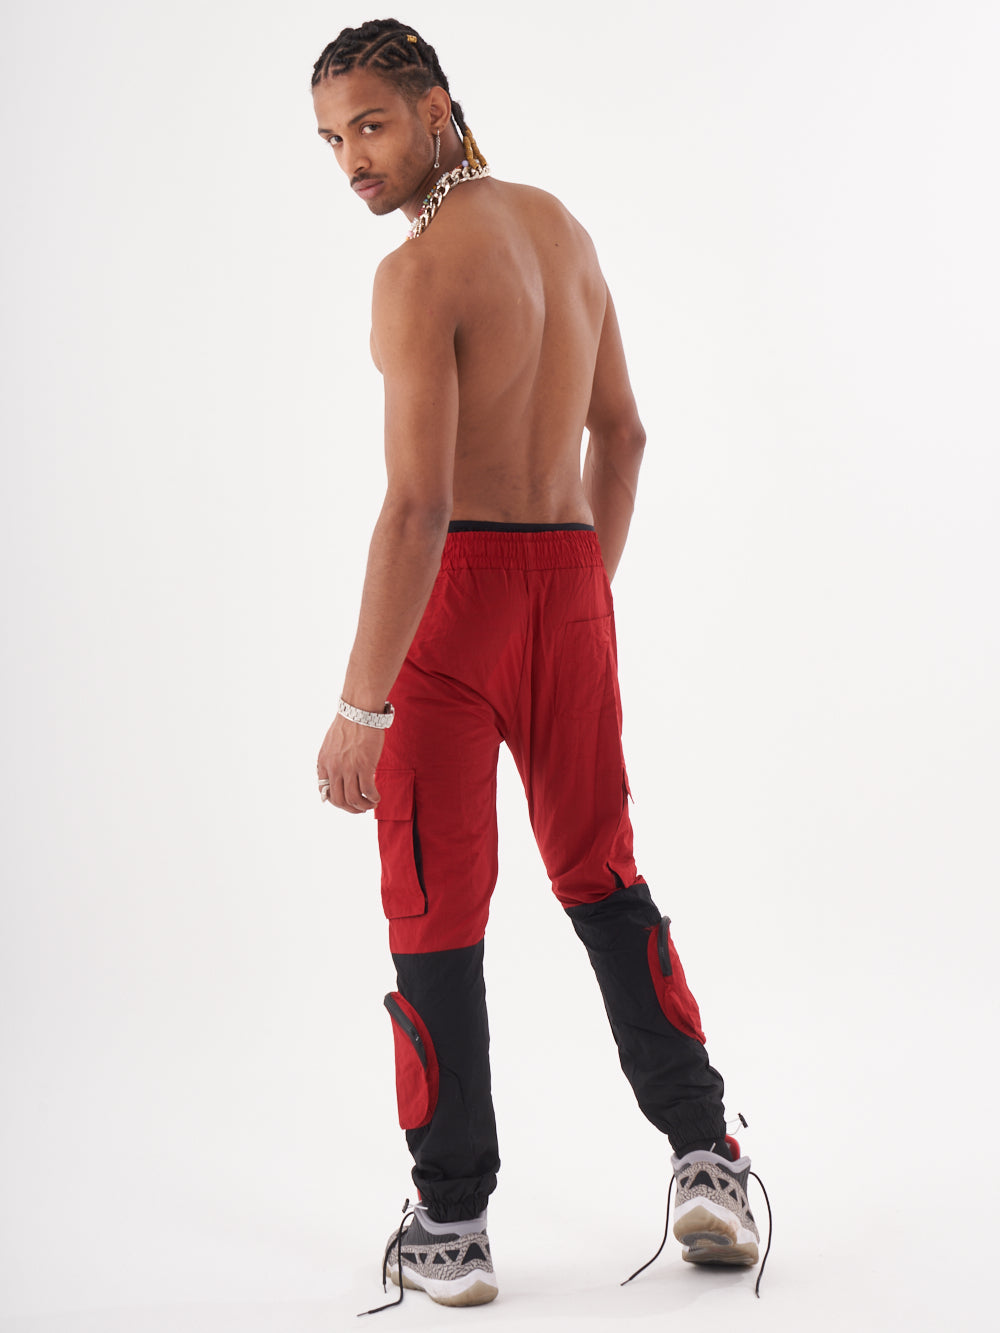 The back of a man wearing RENEGADE | RED jogging pants.